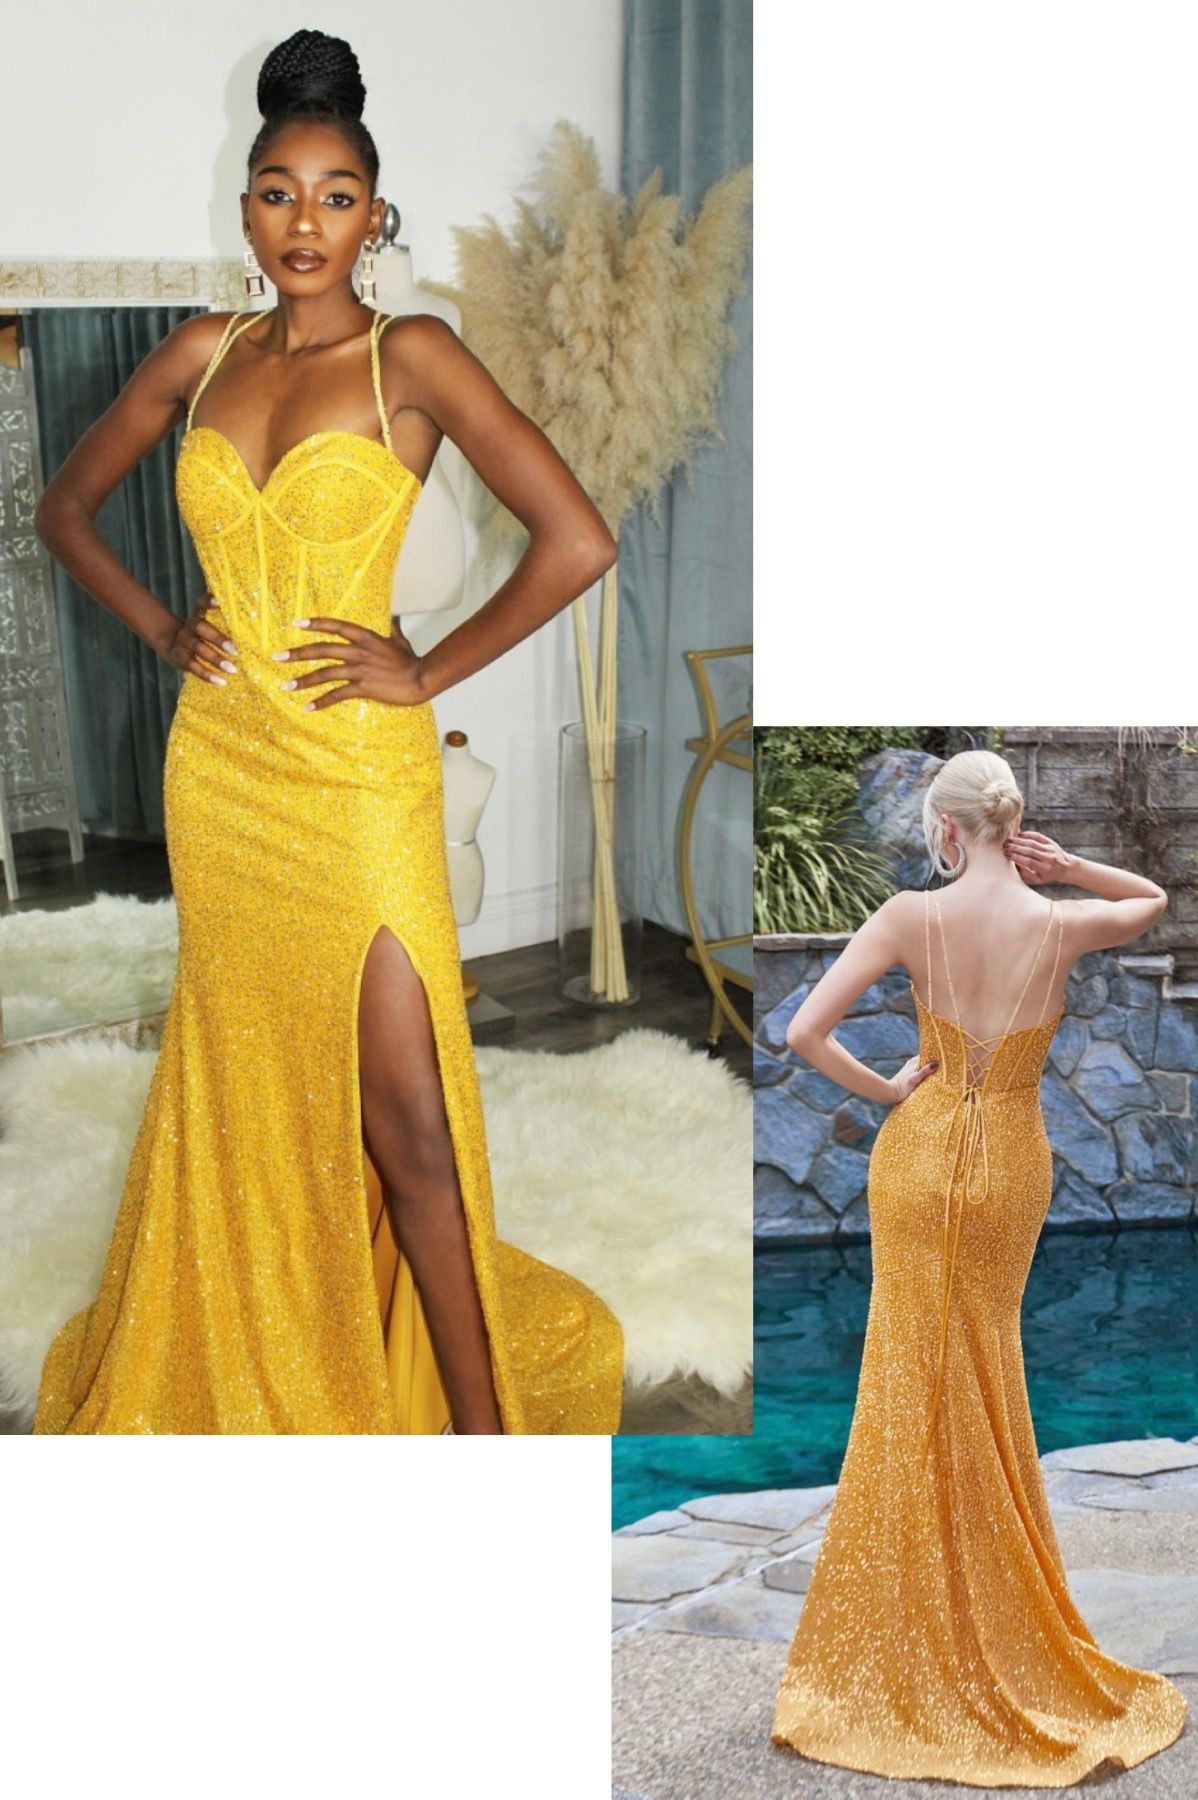 New With Tags Size 6 Yellow Sequin Prom Dress & Formal Dress $216